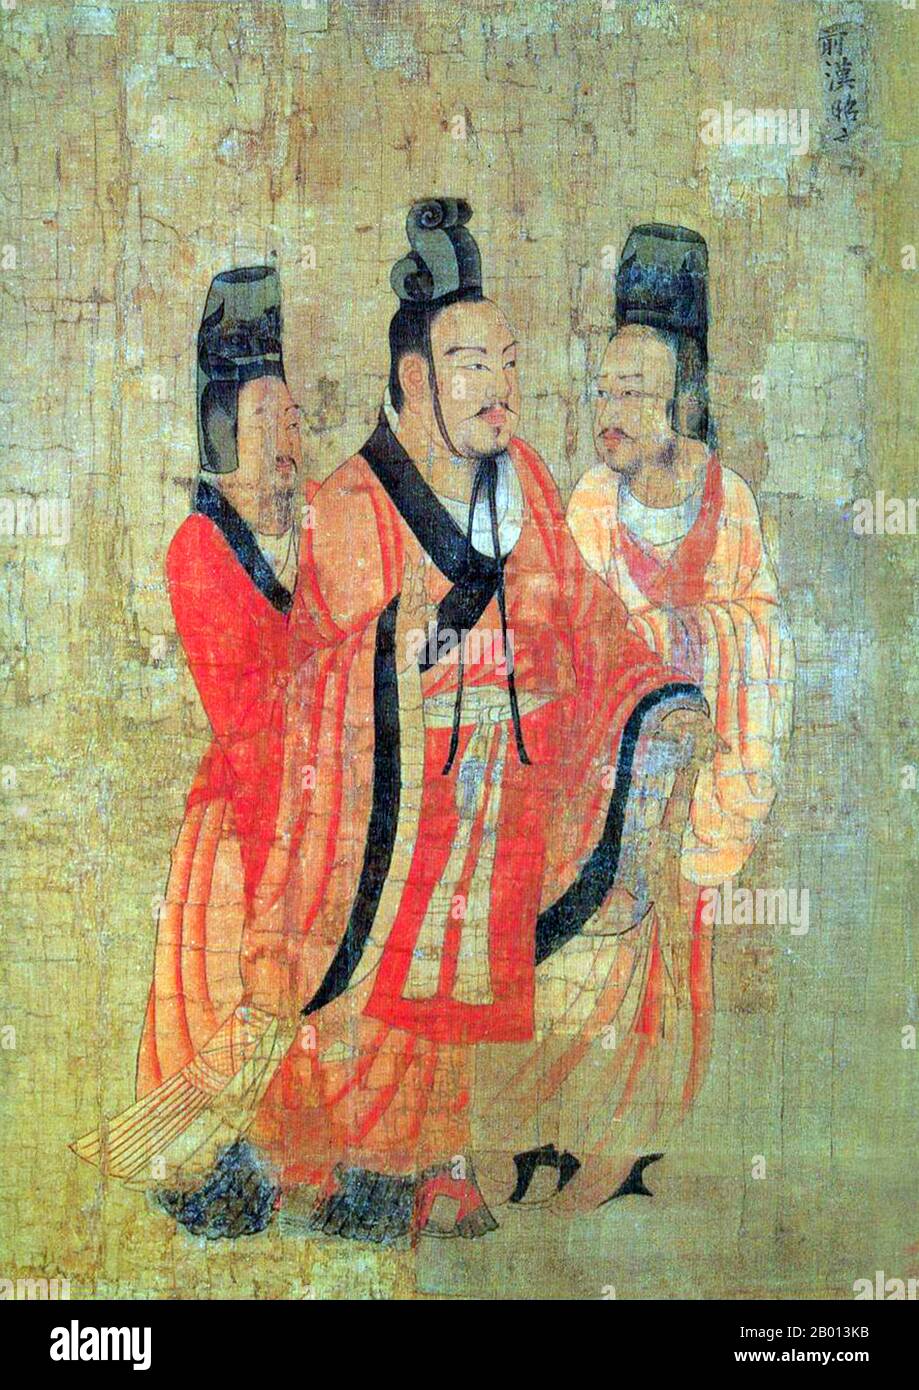 China: Emperor Zhao of Han (94-74 BCE). Handscroll painting from the 'Thirteen Emperors Scroll' by Tang Dynasty court painter Yan Liben (600-673), 7th century.  Emperor Zhao of Han was an emperor of the Chinese Han Dynasty from 87 BCE to 74 BCE. Emperor Zhao was the youngest son of Emperor Wu of Han. By the time Zhao was born, Emperor Wu was already 62. Zhao ascended the throne only 8 years old, and Huo Guang served as regent. Emperor Zhao, under the tutelage of Huo, took the initiative and lowered taxes and reduced government spending. Citizens prospered and the Han Dynasty enjoyed peace. Stock Photo